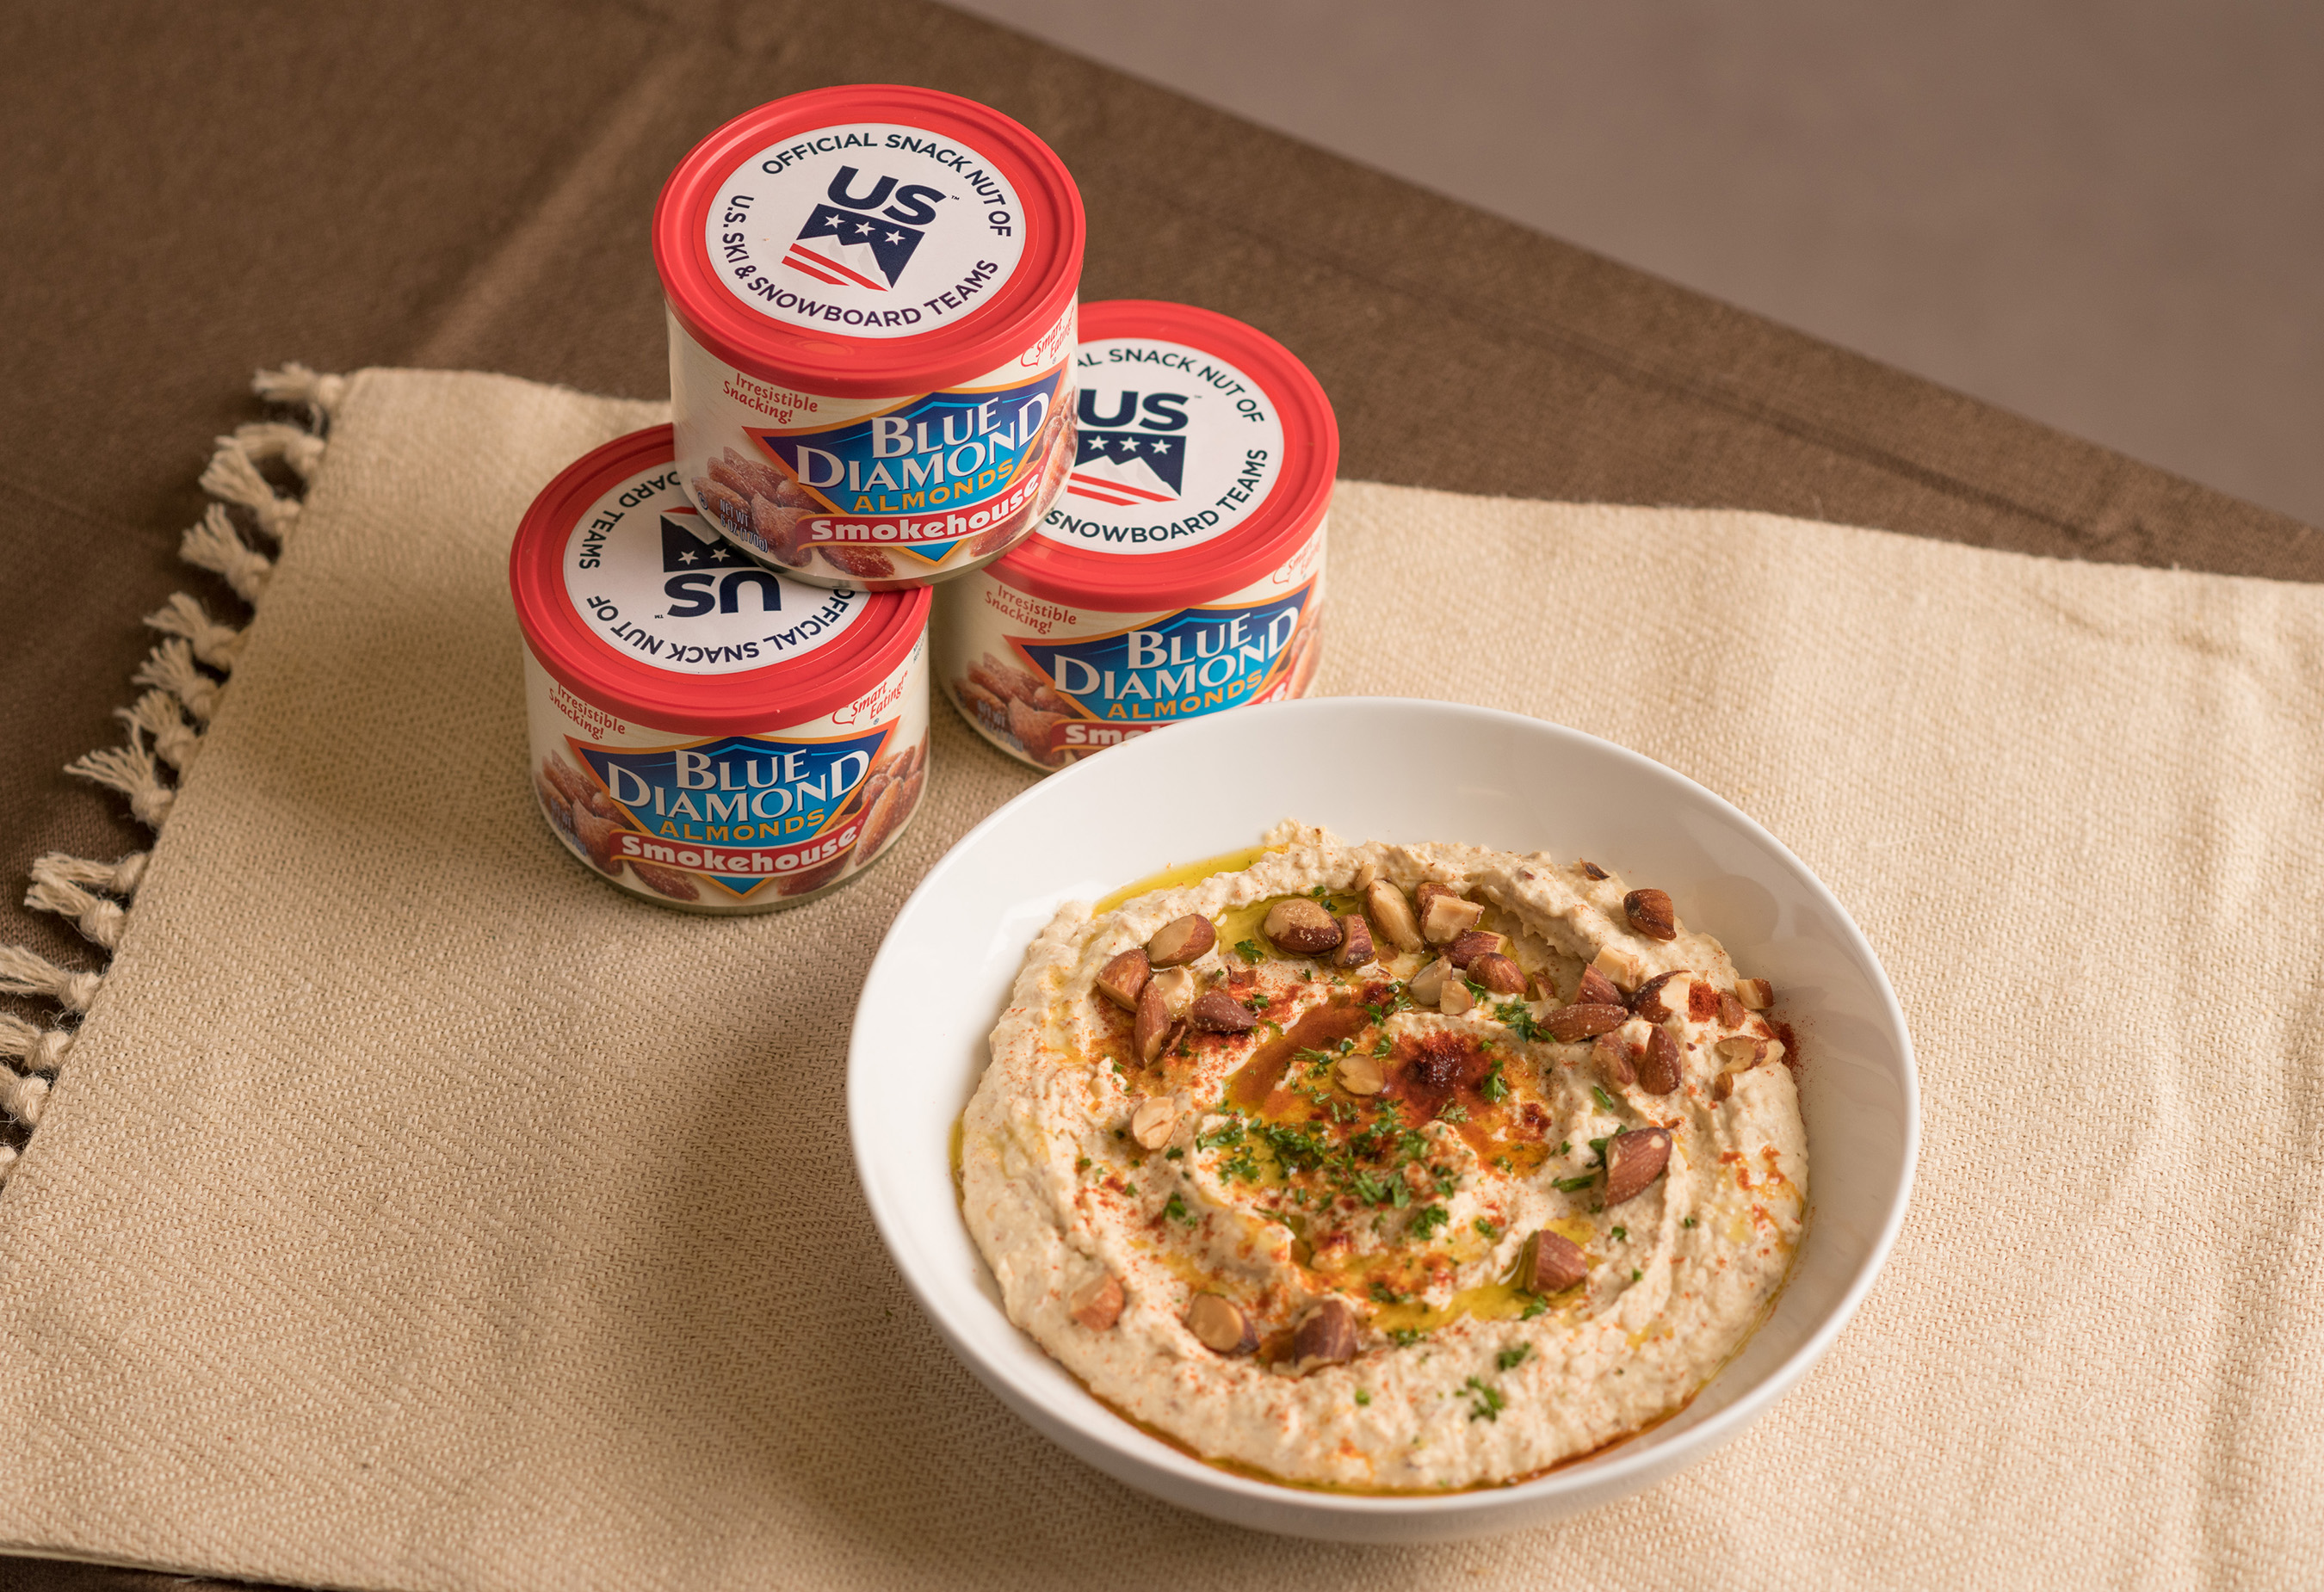 The Smokehouse Almond Hummus gets its bold, smoky flavor from Blue Diamond Smokehouse almonds - a perfect match for the bold athletes.